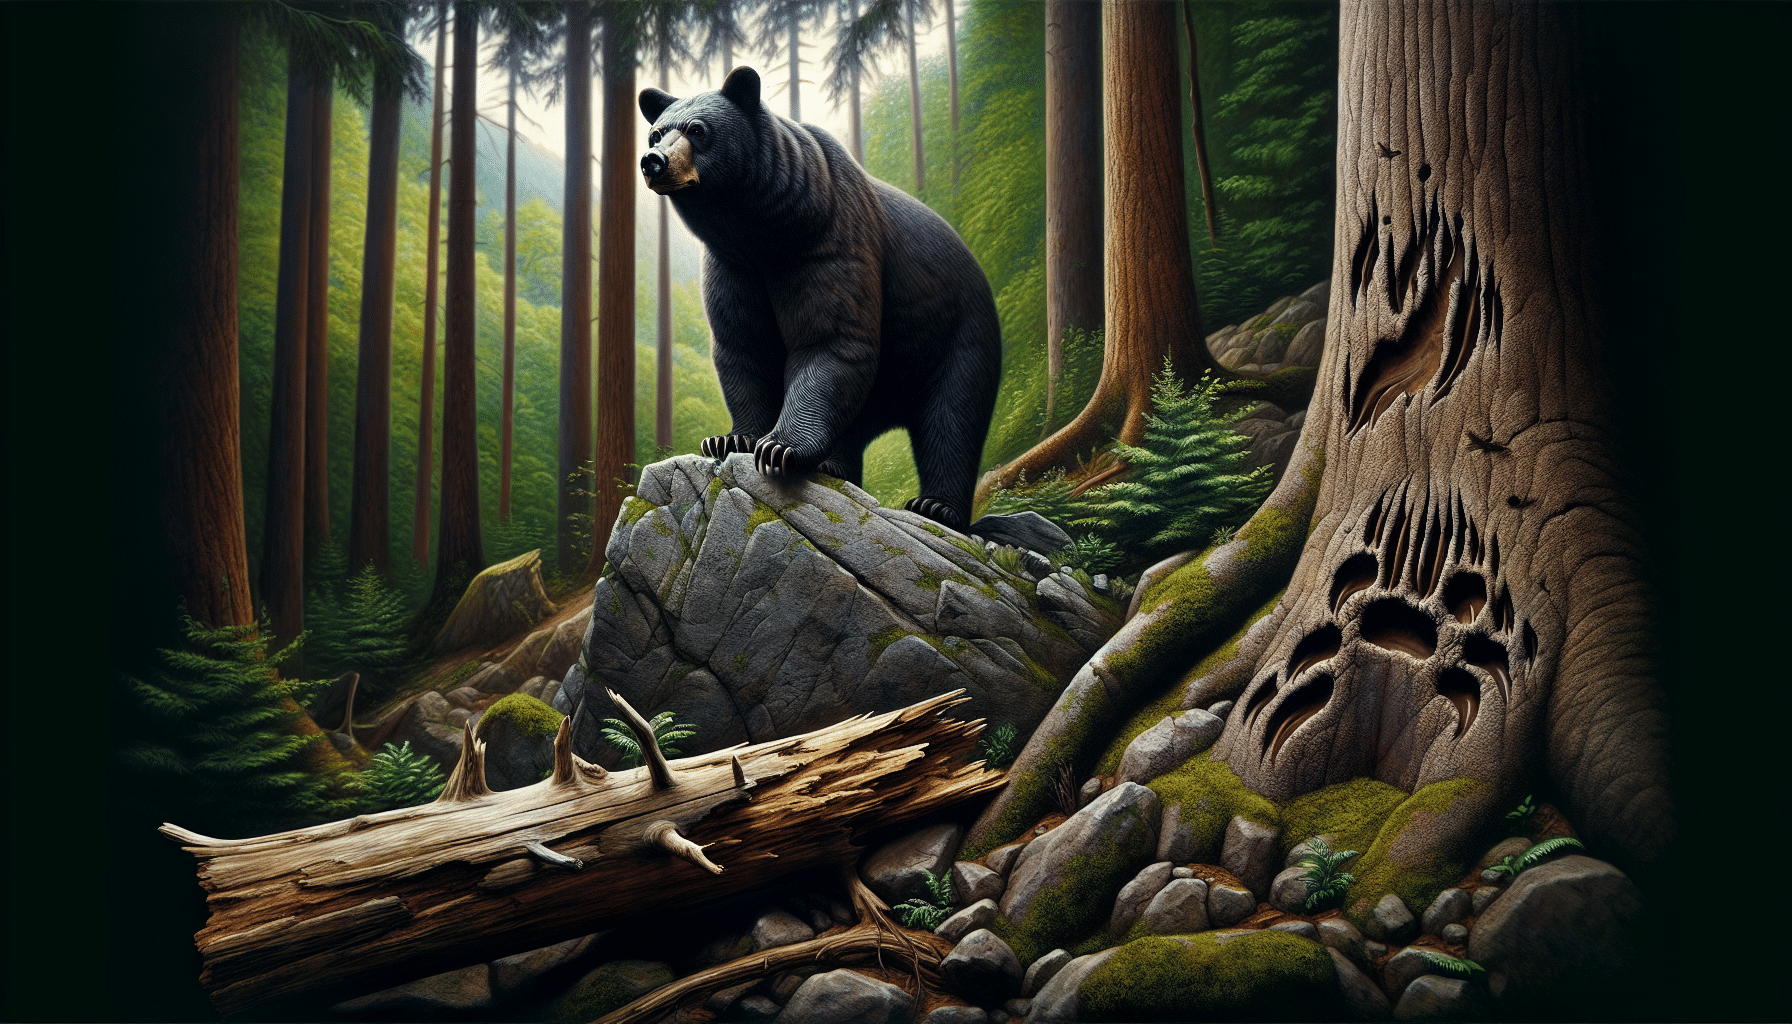 An incredibly detailed scene of a black bear in its natural habitat showcasing its strength. An adult bear can be seen perched on a large rock, its muscular build and powerful limbs quite evident. Near by, the bear has left clear signs of its strength, a fallen tree with claw marks. The dense forest encircles this scene, underlining the bear's magnificent presence within its environment. This image carries an aesthetic of realism, with precise attention to color and detail, bringing out the potent combination of the bear’s power and elegance.